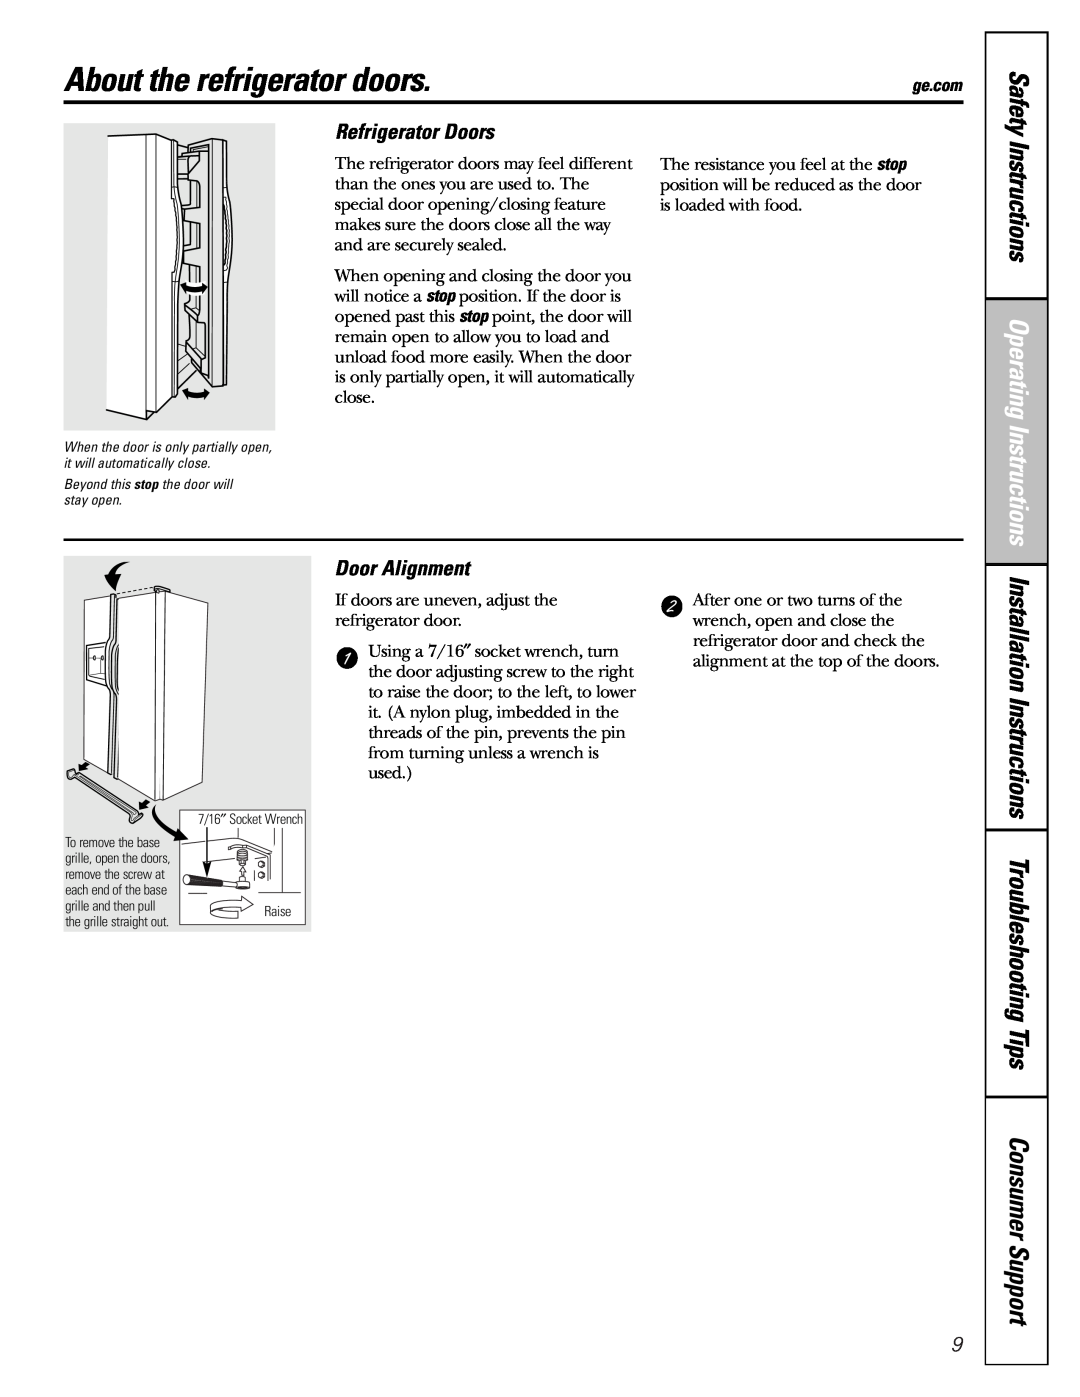 GE 25 and 27 About the refrigerator doors, Instructions Operating Instructions, Refrigerator Doors, Door Alignment 